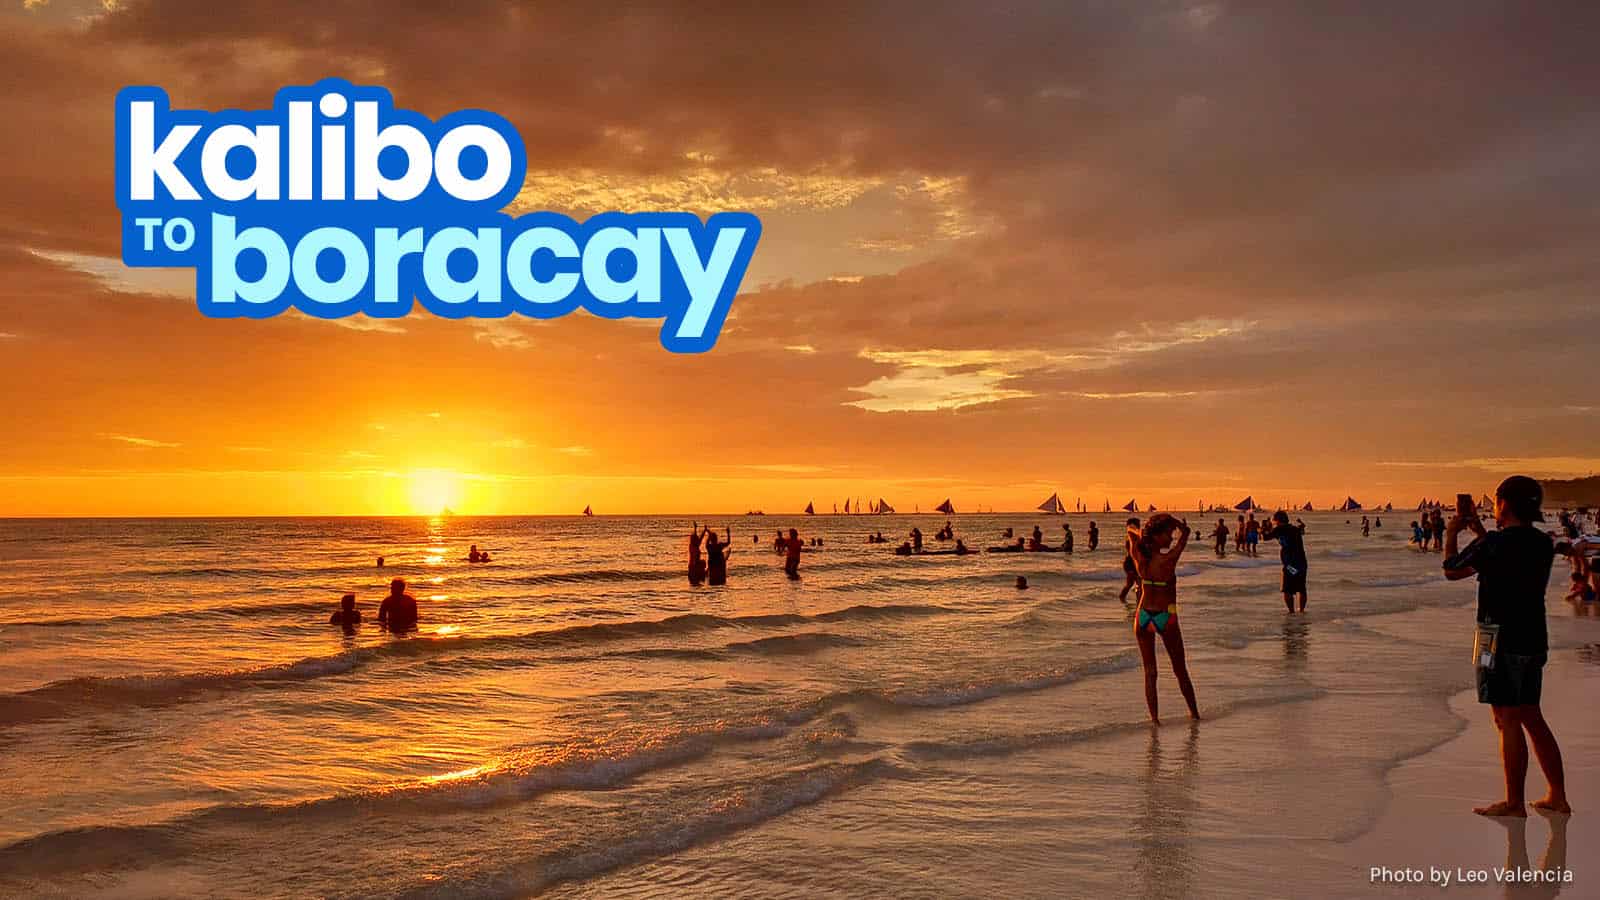 HOW TO GET TO BORACAY FROM KALIBO AIRPORT